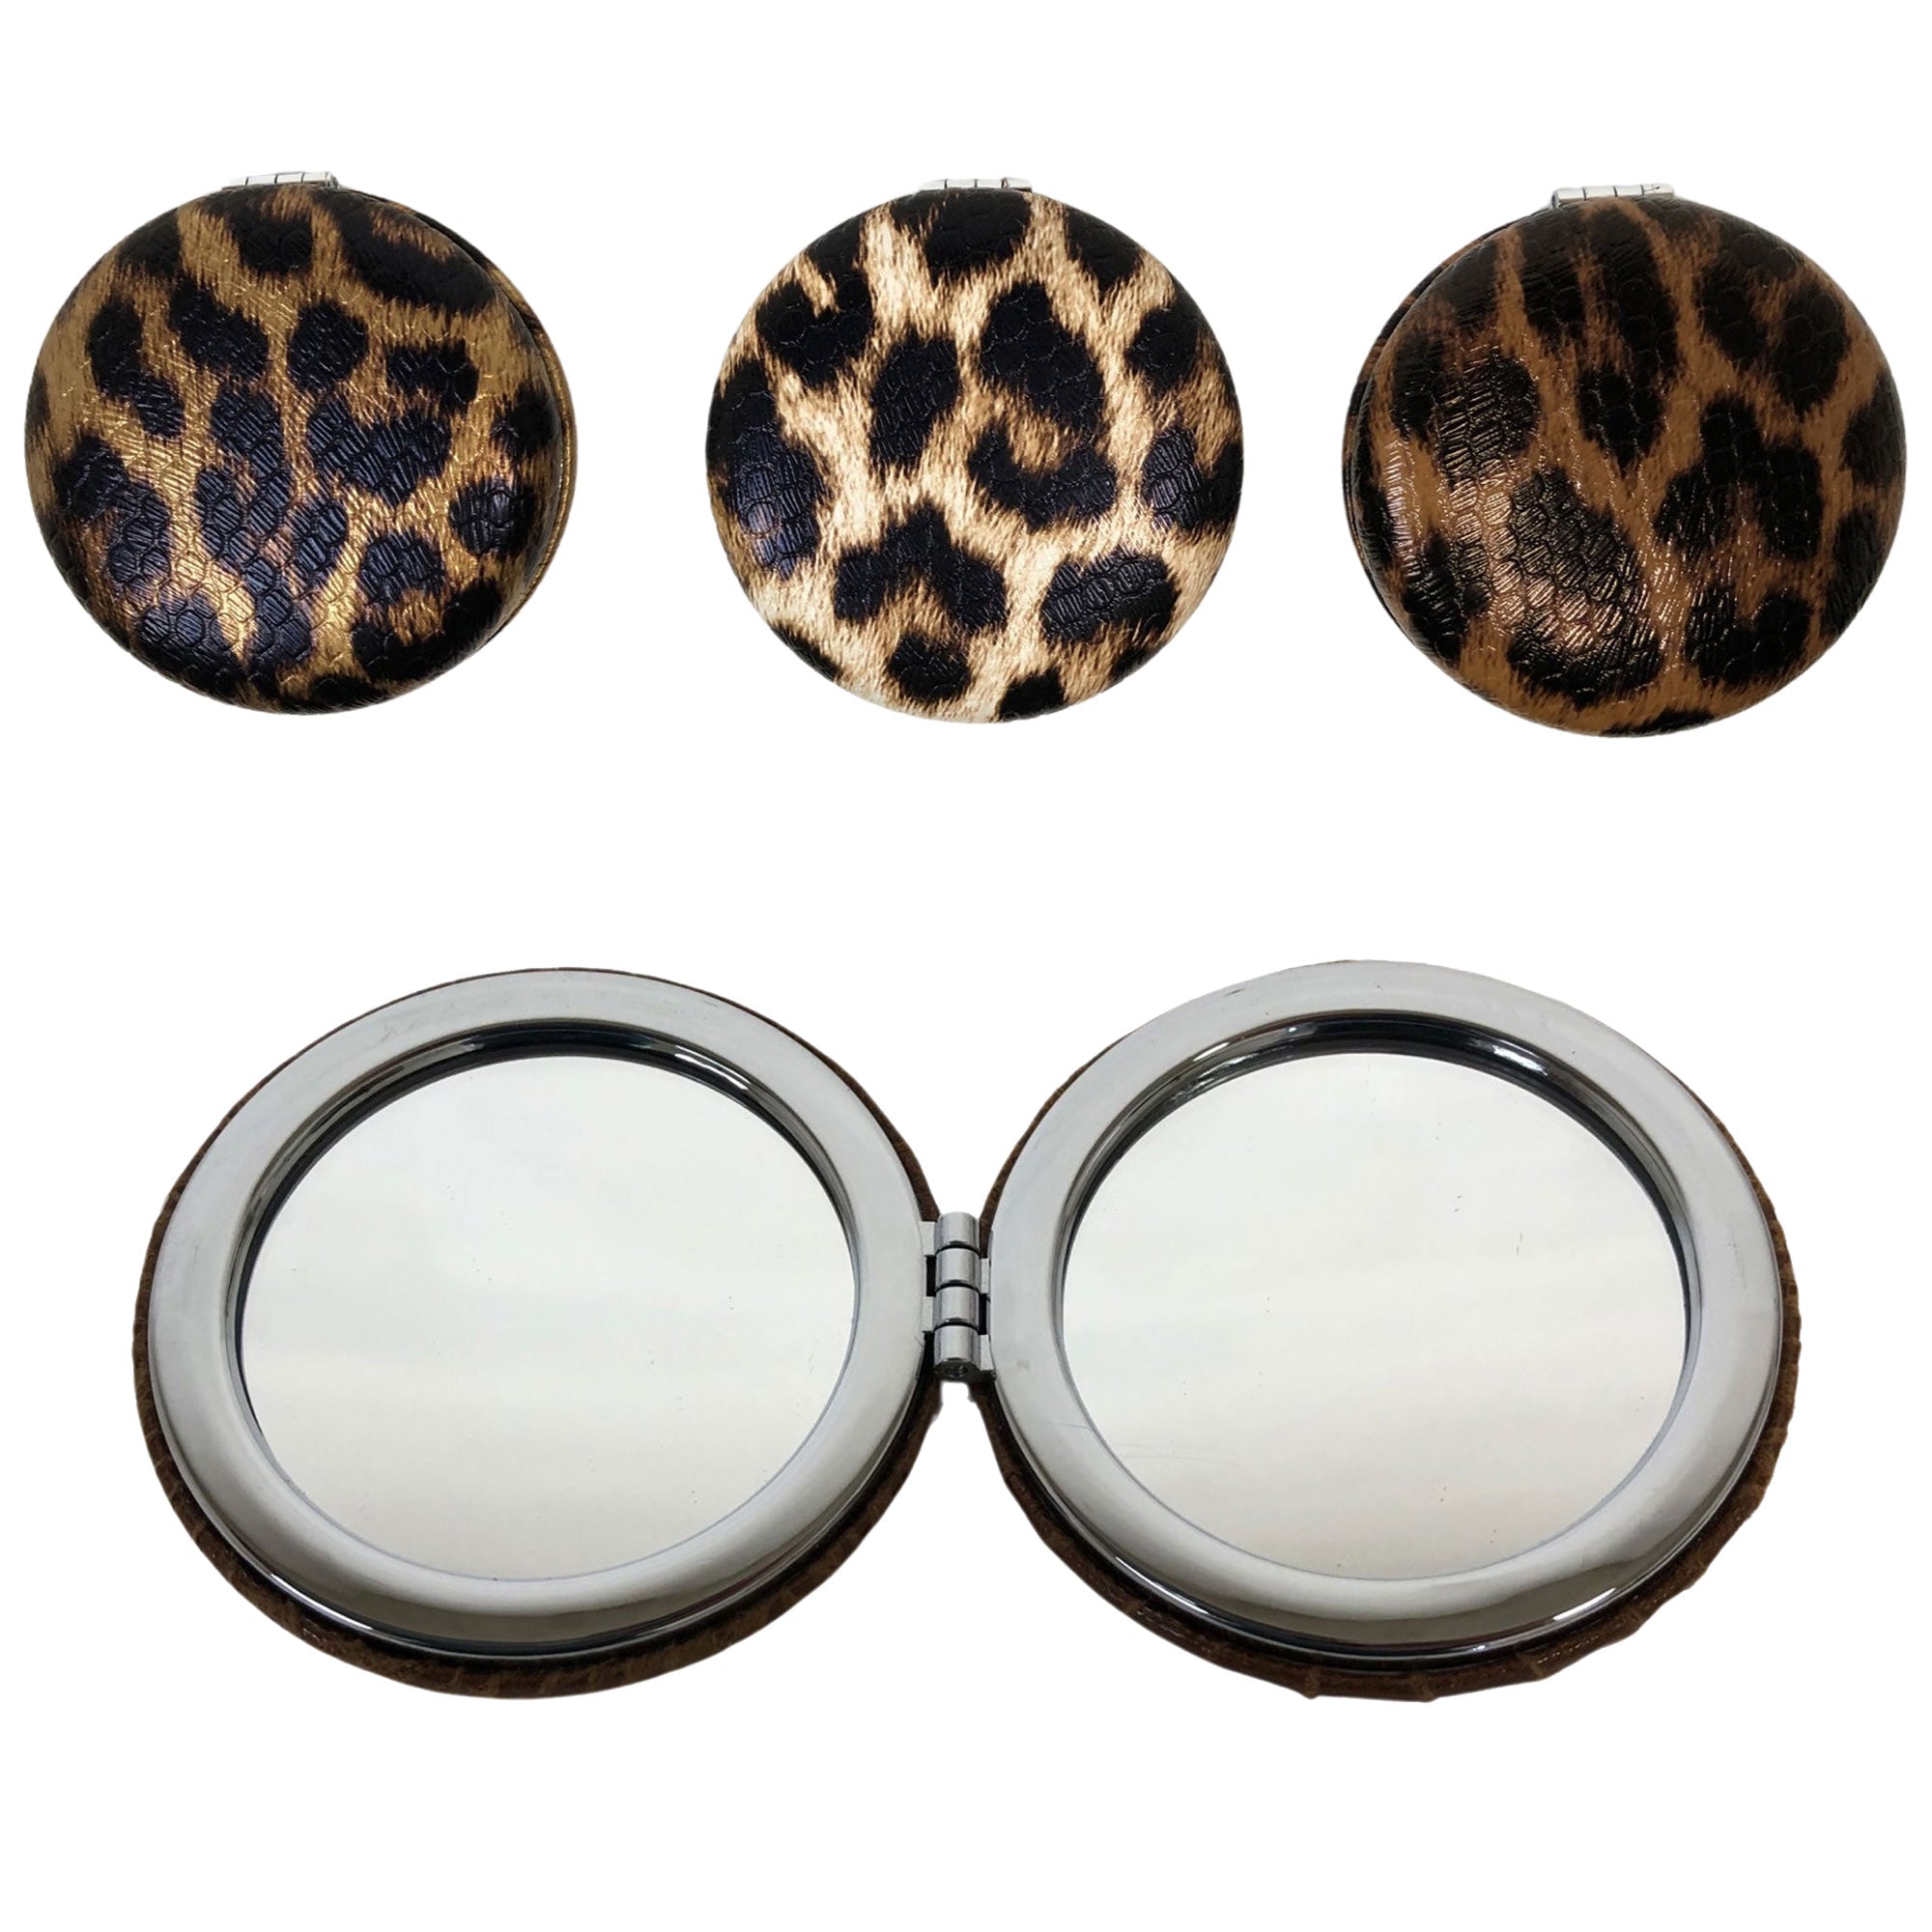 CLEARANCE ROUND COSMETIC LEOPARD PRINTS (CASE OF 48 - $1.50 / PIECE)  Wholesale Cosmetic Mirrors in Assorted Prints SKU: 909-LEO-48